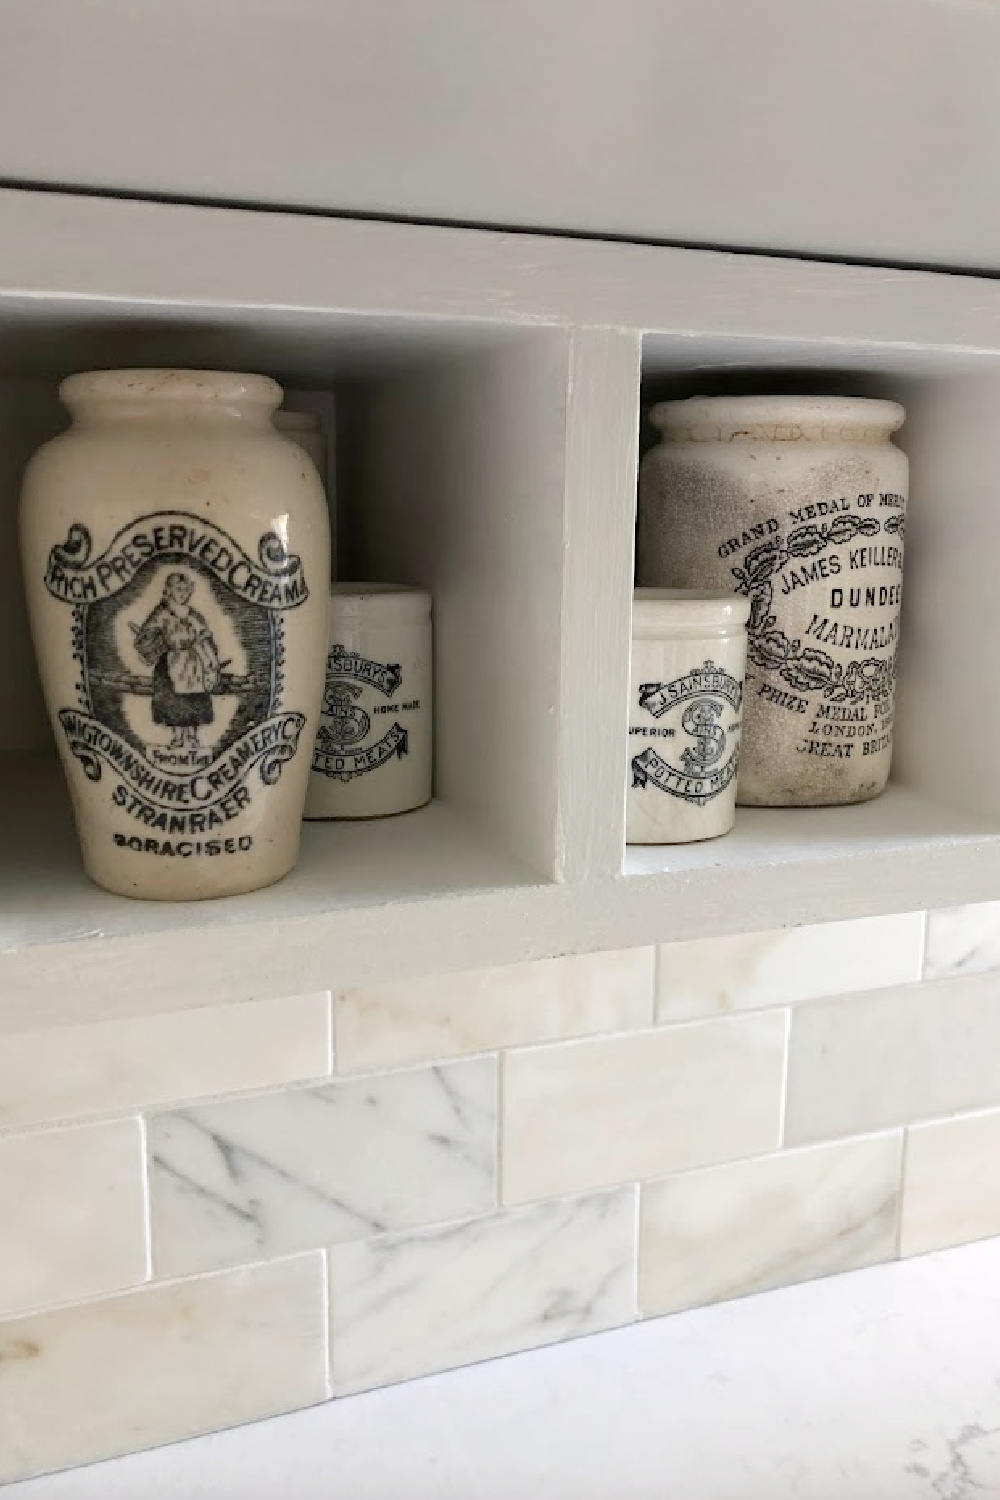 Vintage marmalade jar collection in my kitchen with calacatta gold marble tile in kitchen - Hello Lovely Studio.